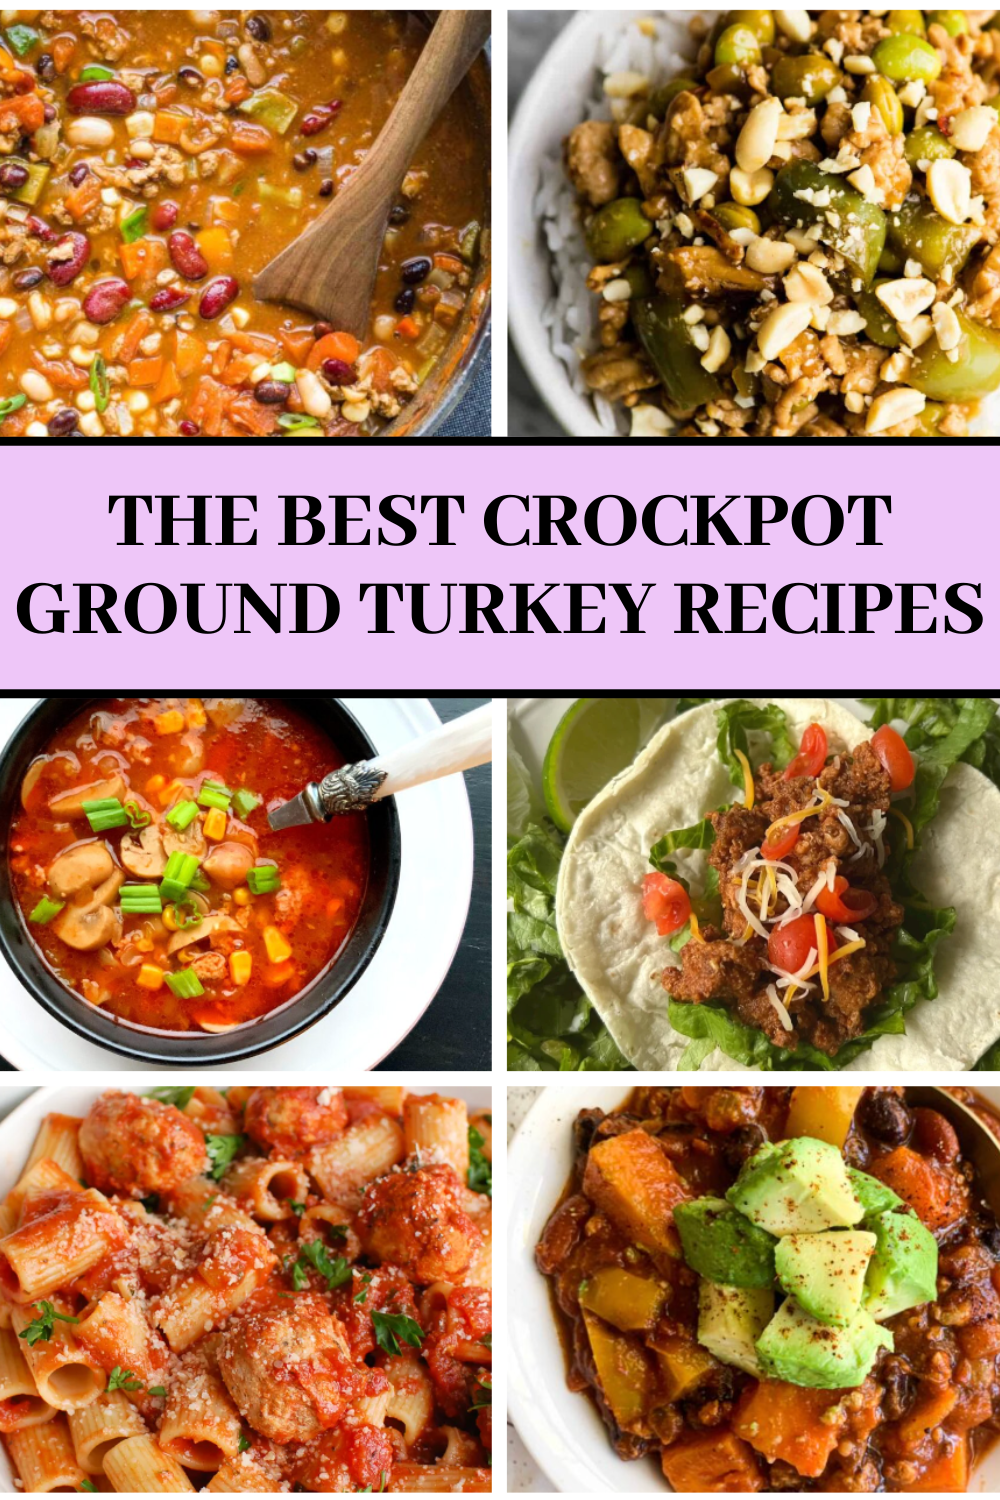 Ground Turkey Recipes for Crockpot You NEED To Make!